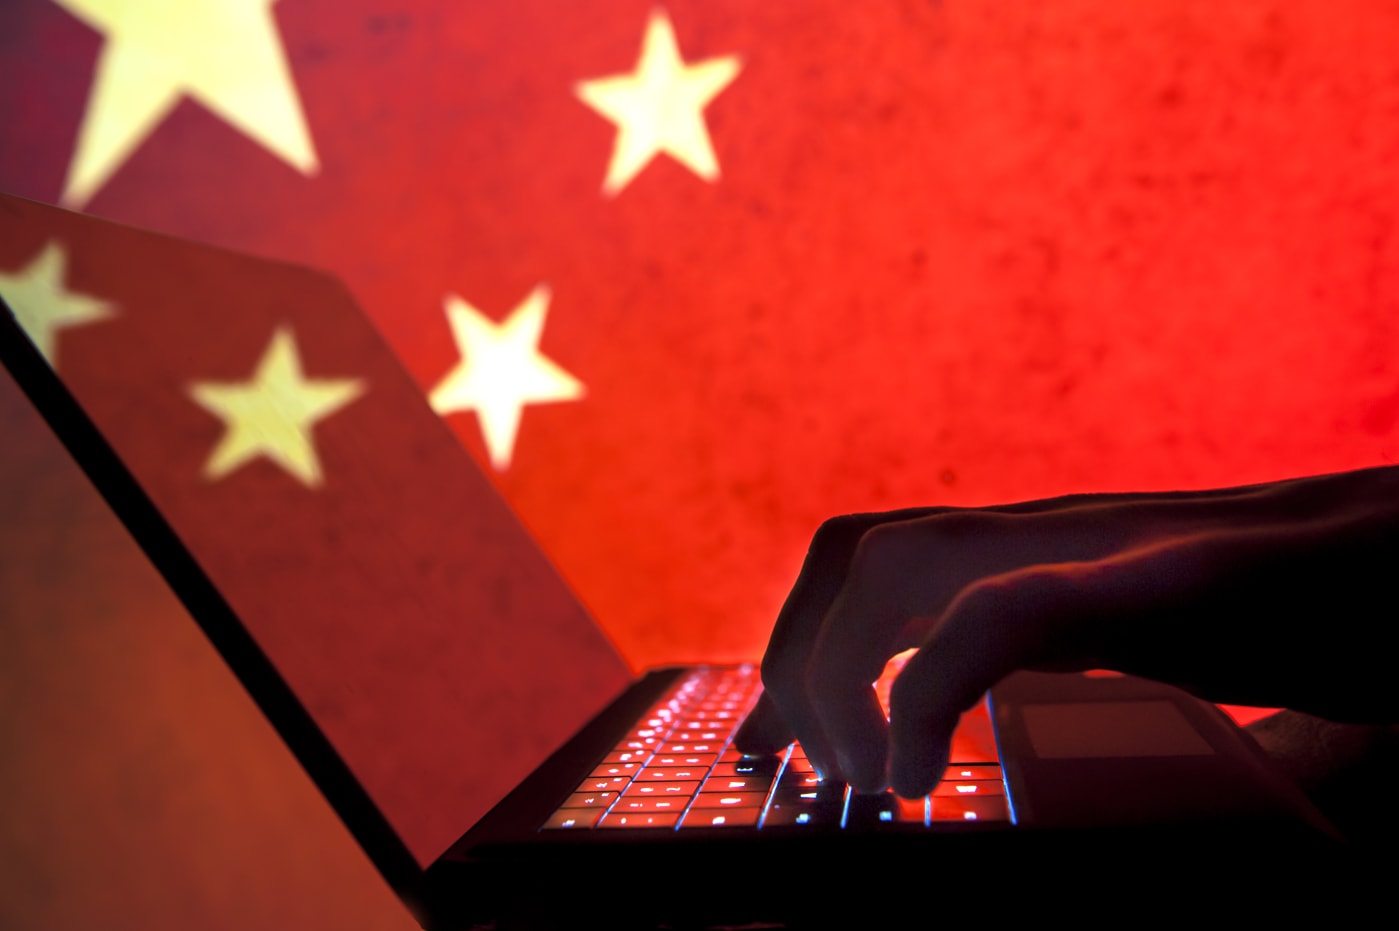 US officials believe Chinese hackers lurk in critical infrastructure